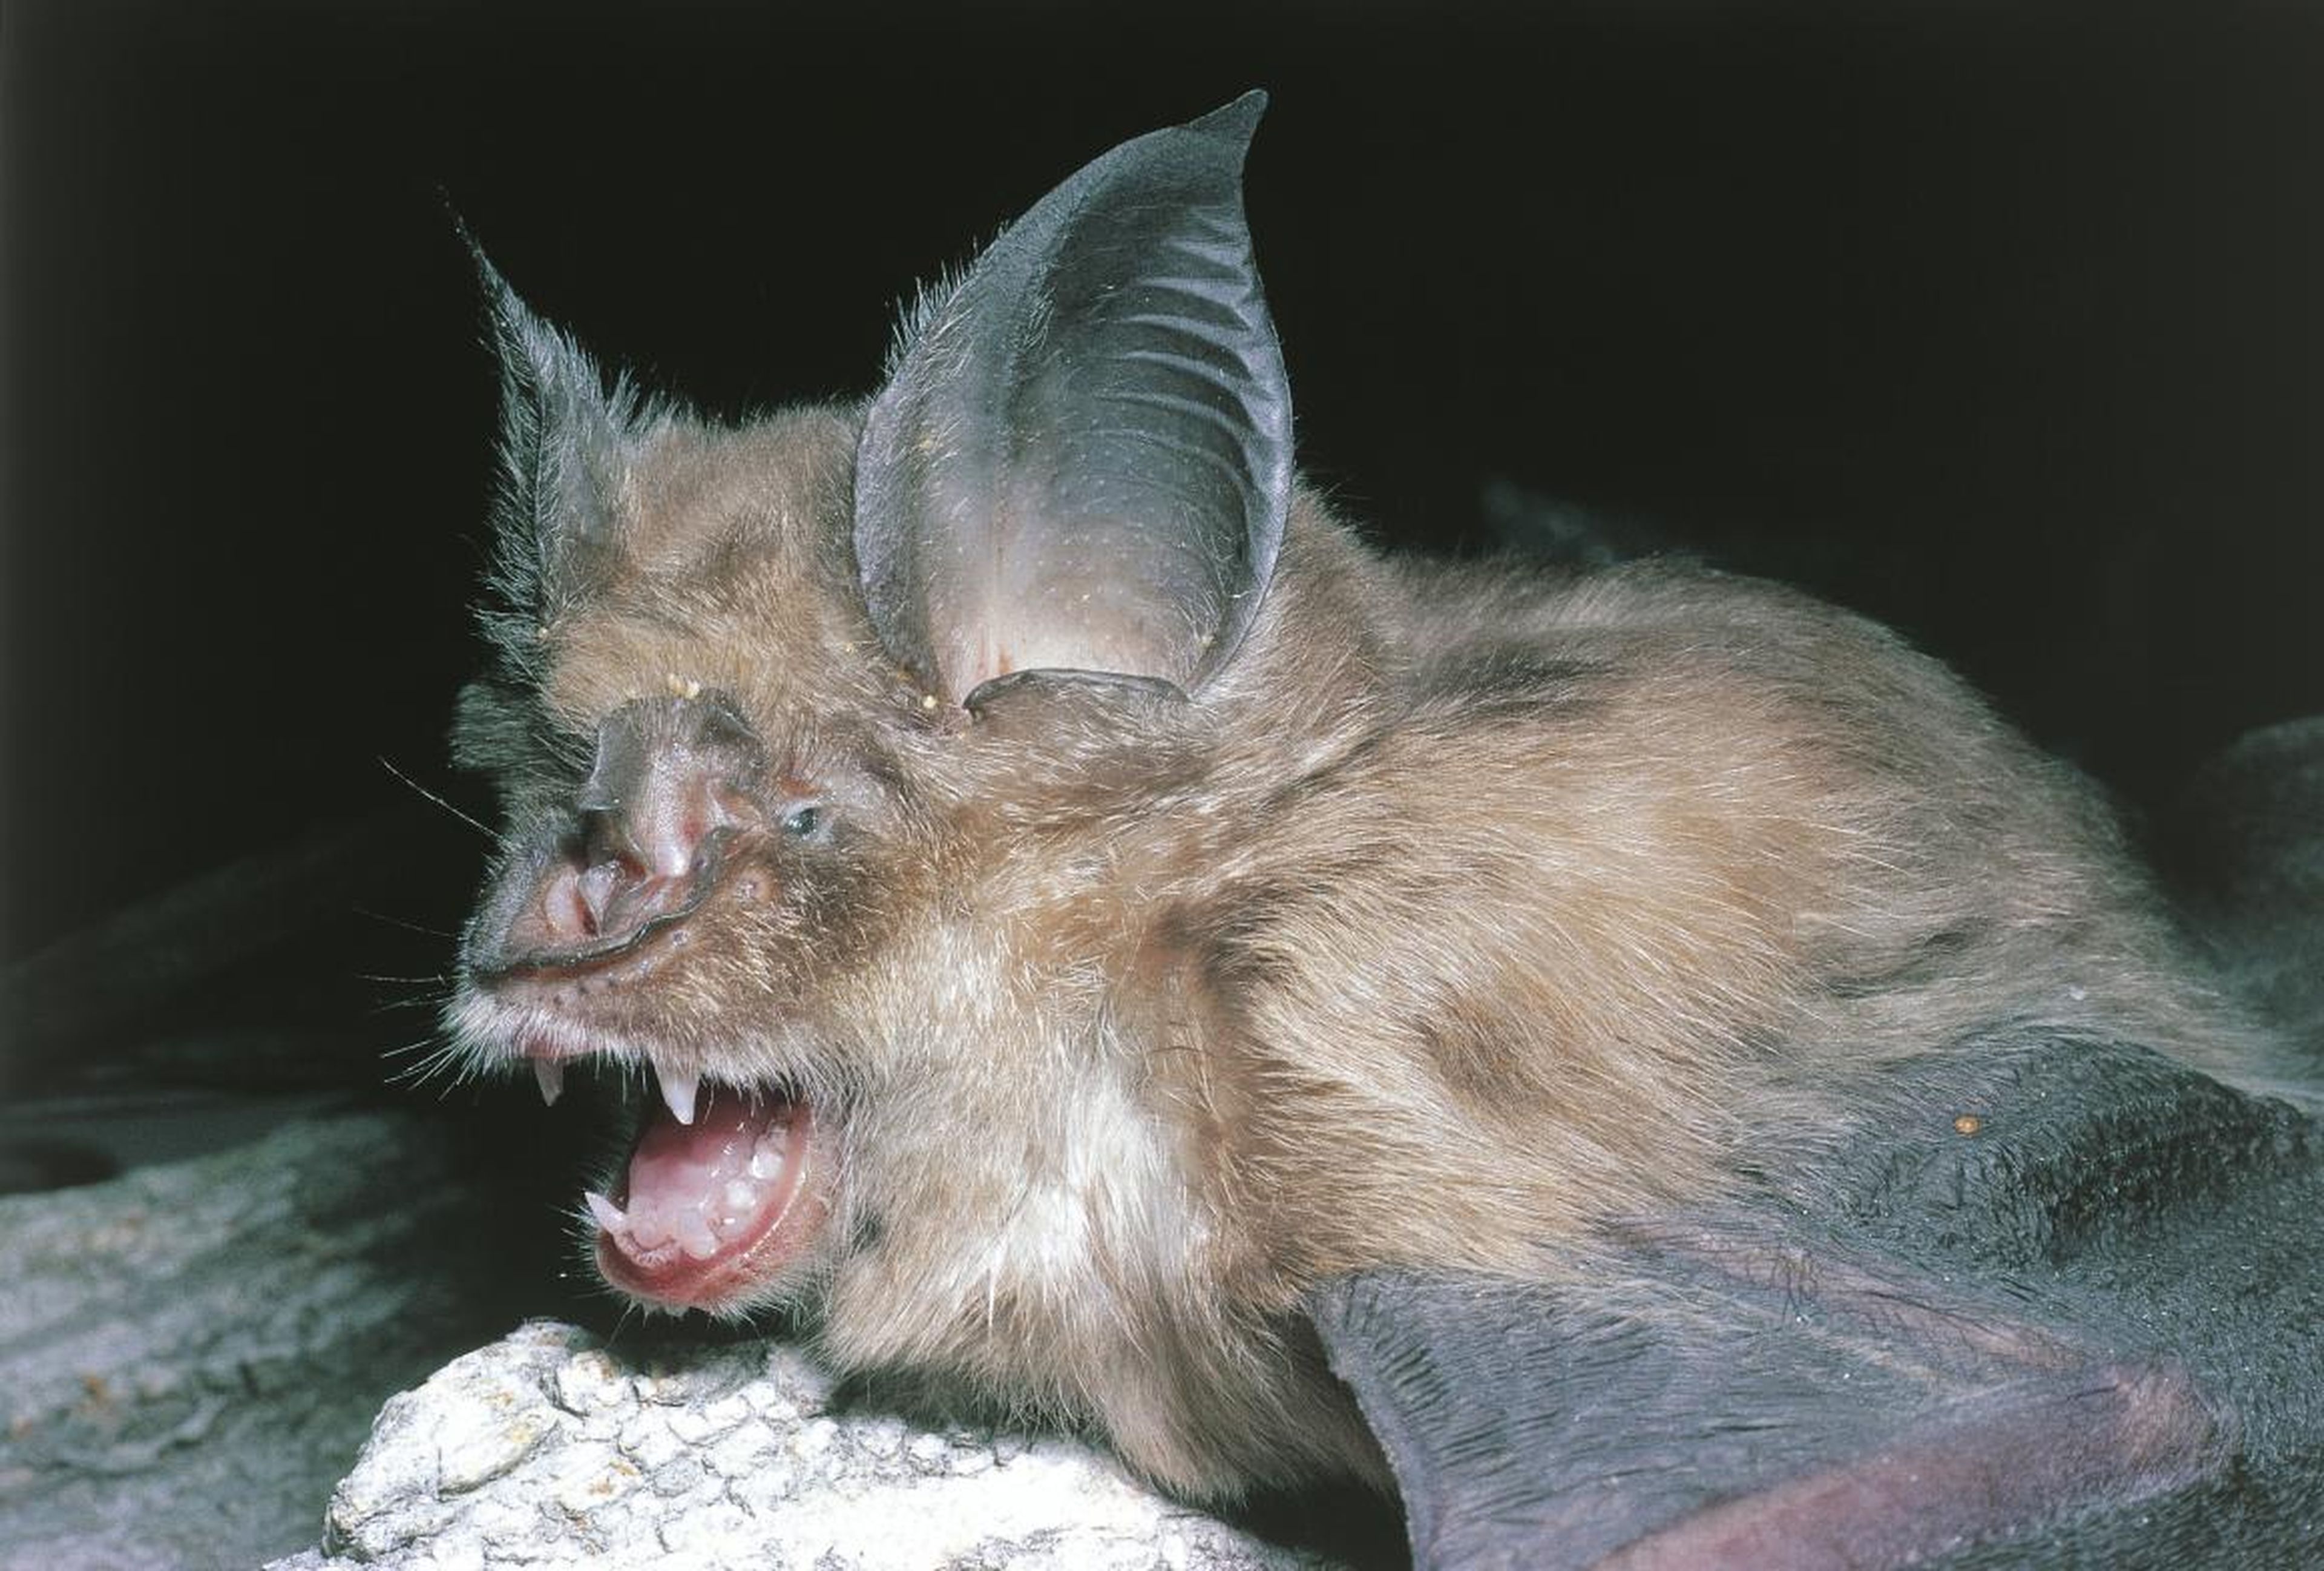 A greater horseshoe bat, a relative of the Rhinolophis sinicus bat species from China that was the origin of the SARS virus.